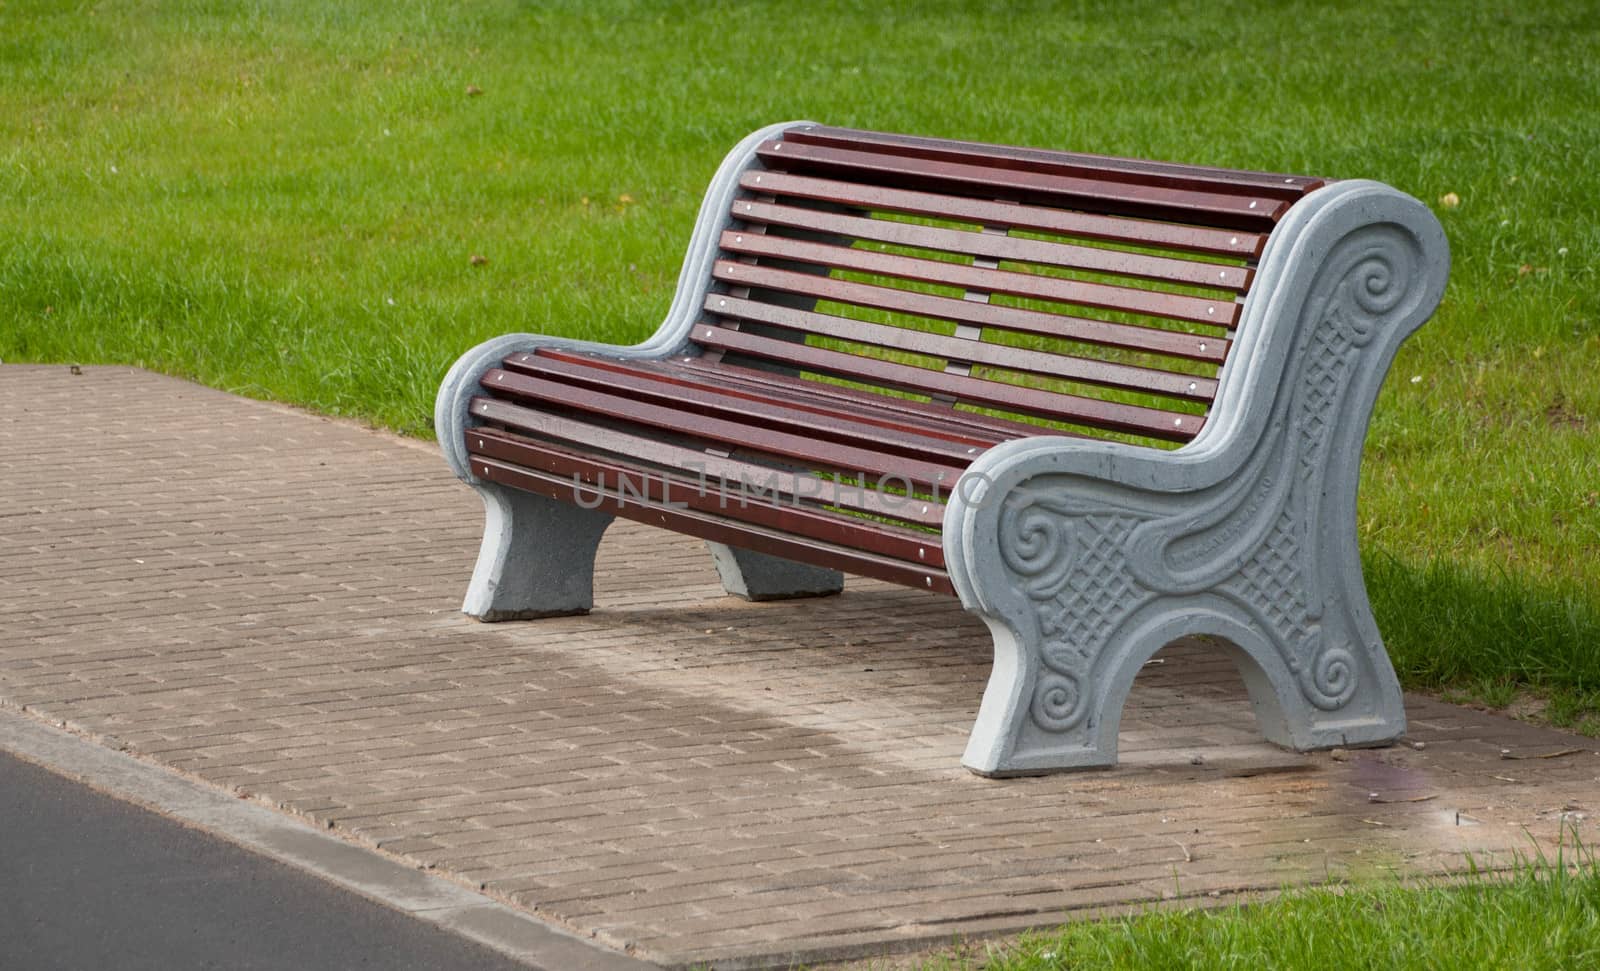  wooden bench in the city park by alexx60